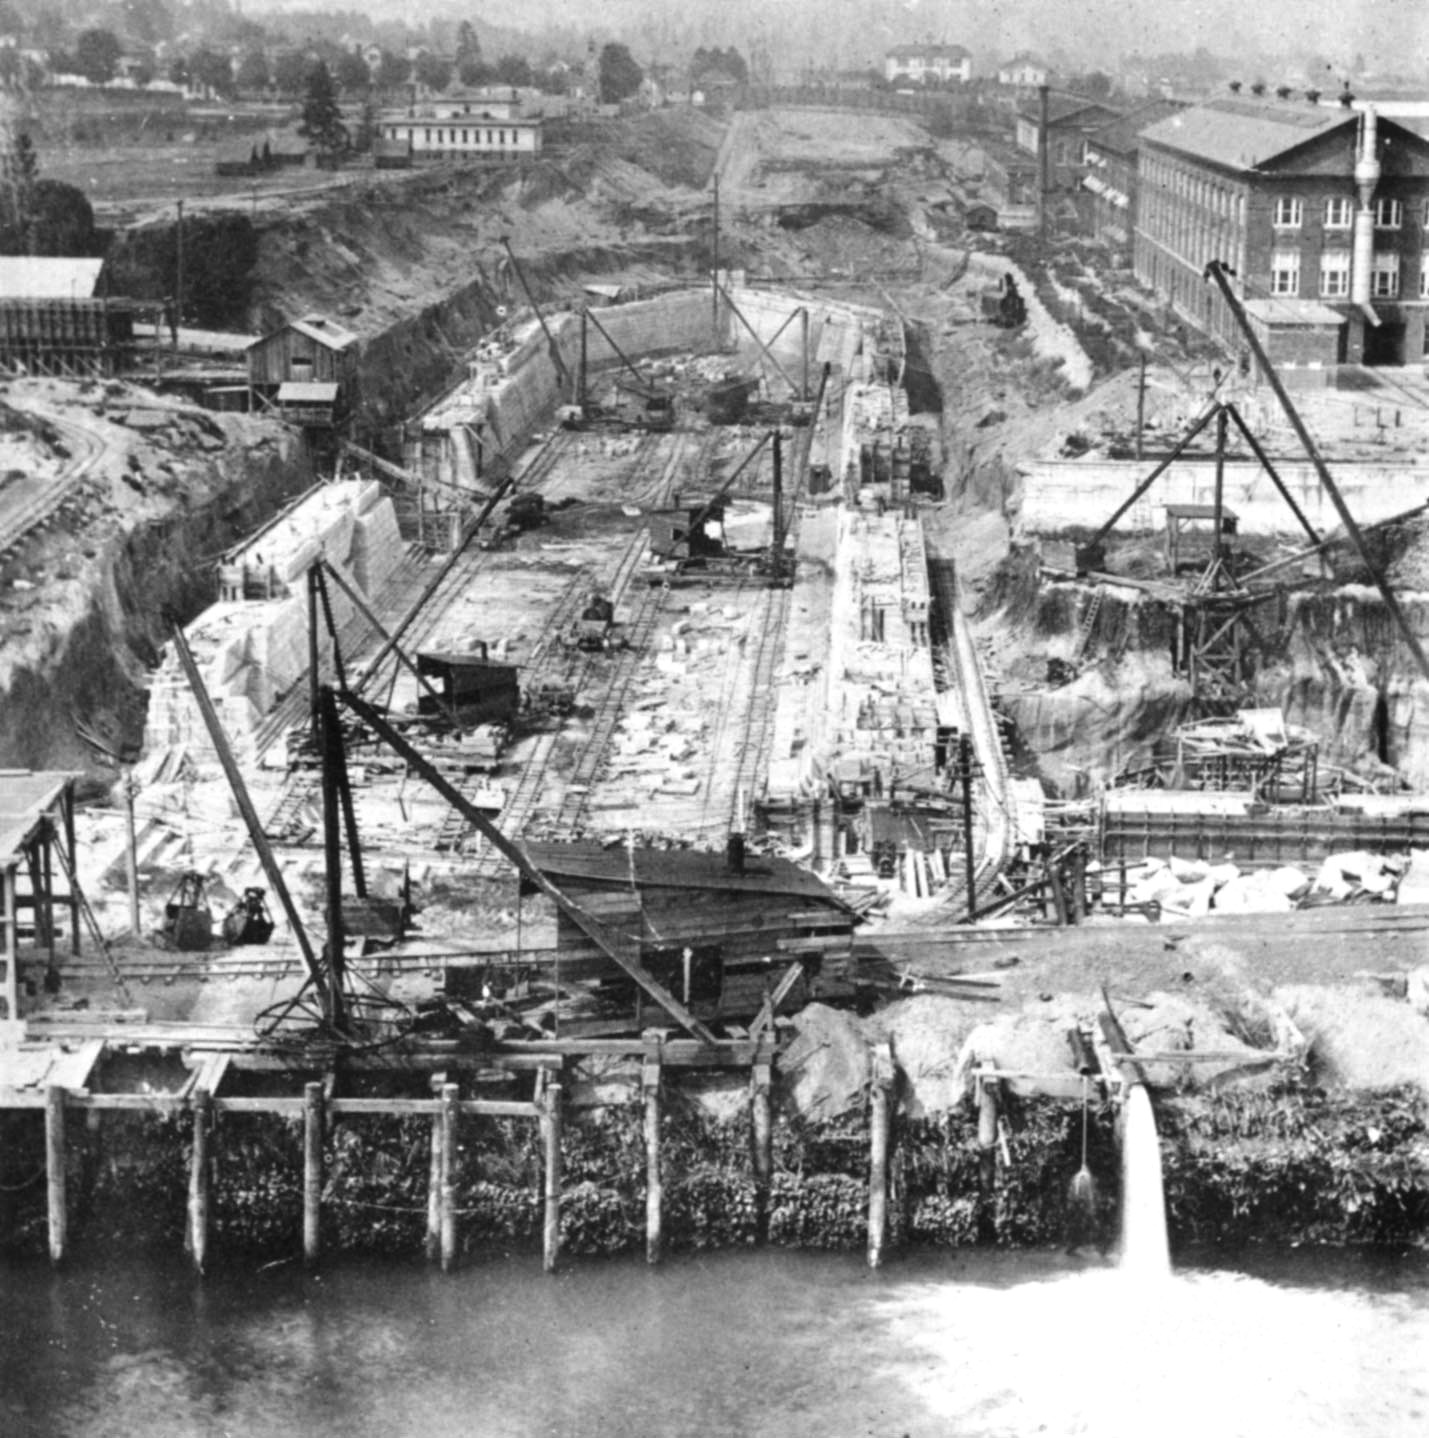 Puget Sound Naval Shipyard in Bremerton, Washington, United States with dry dock number two under construction, circa 1911.